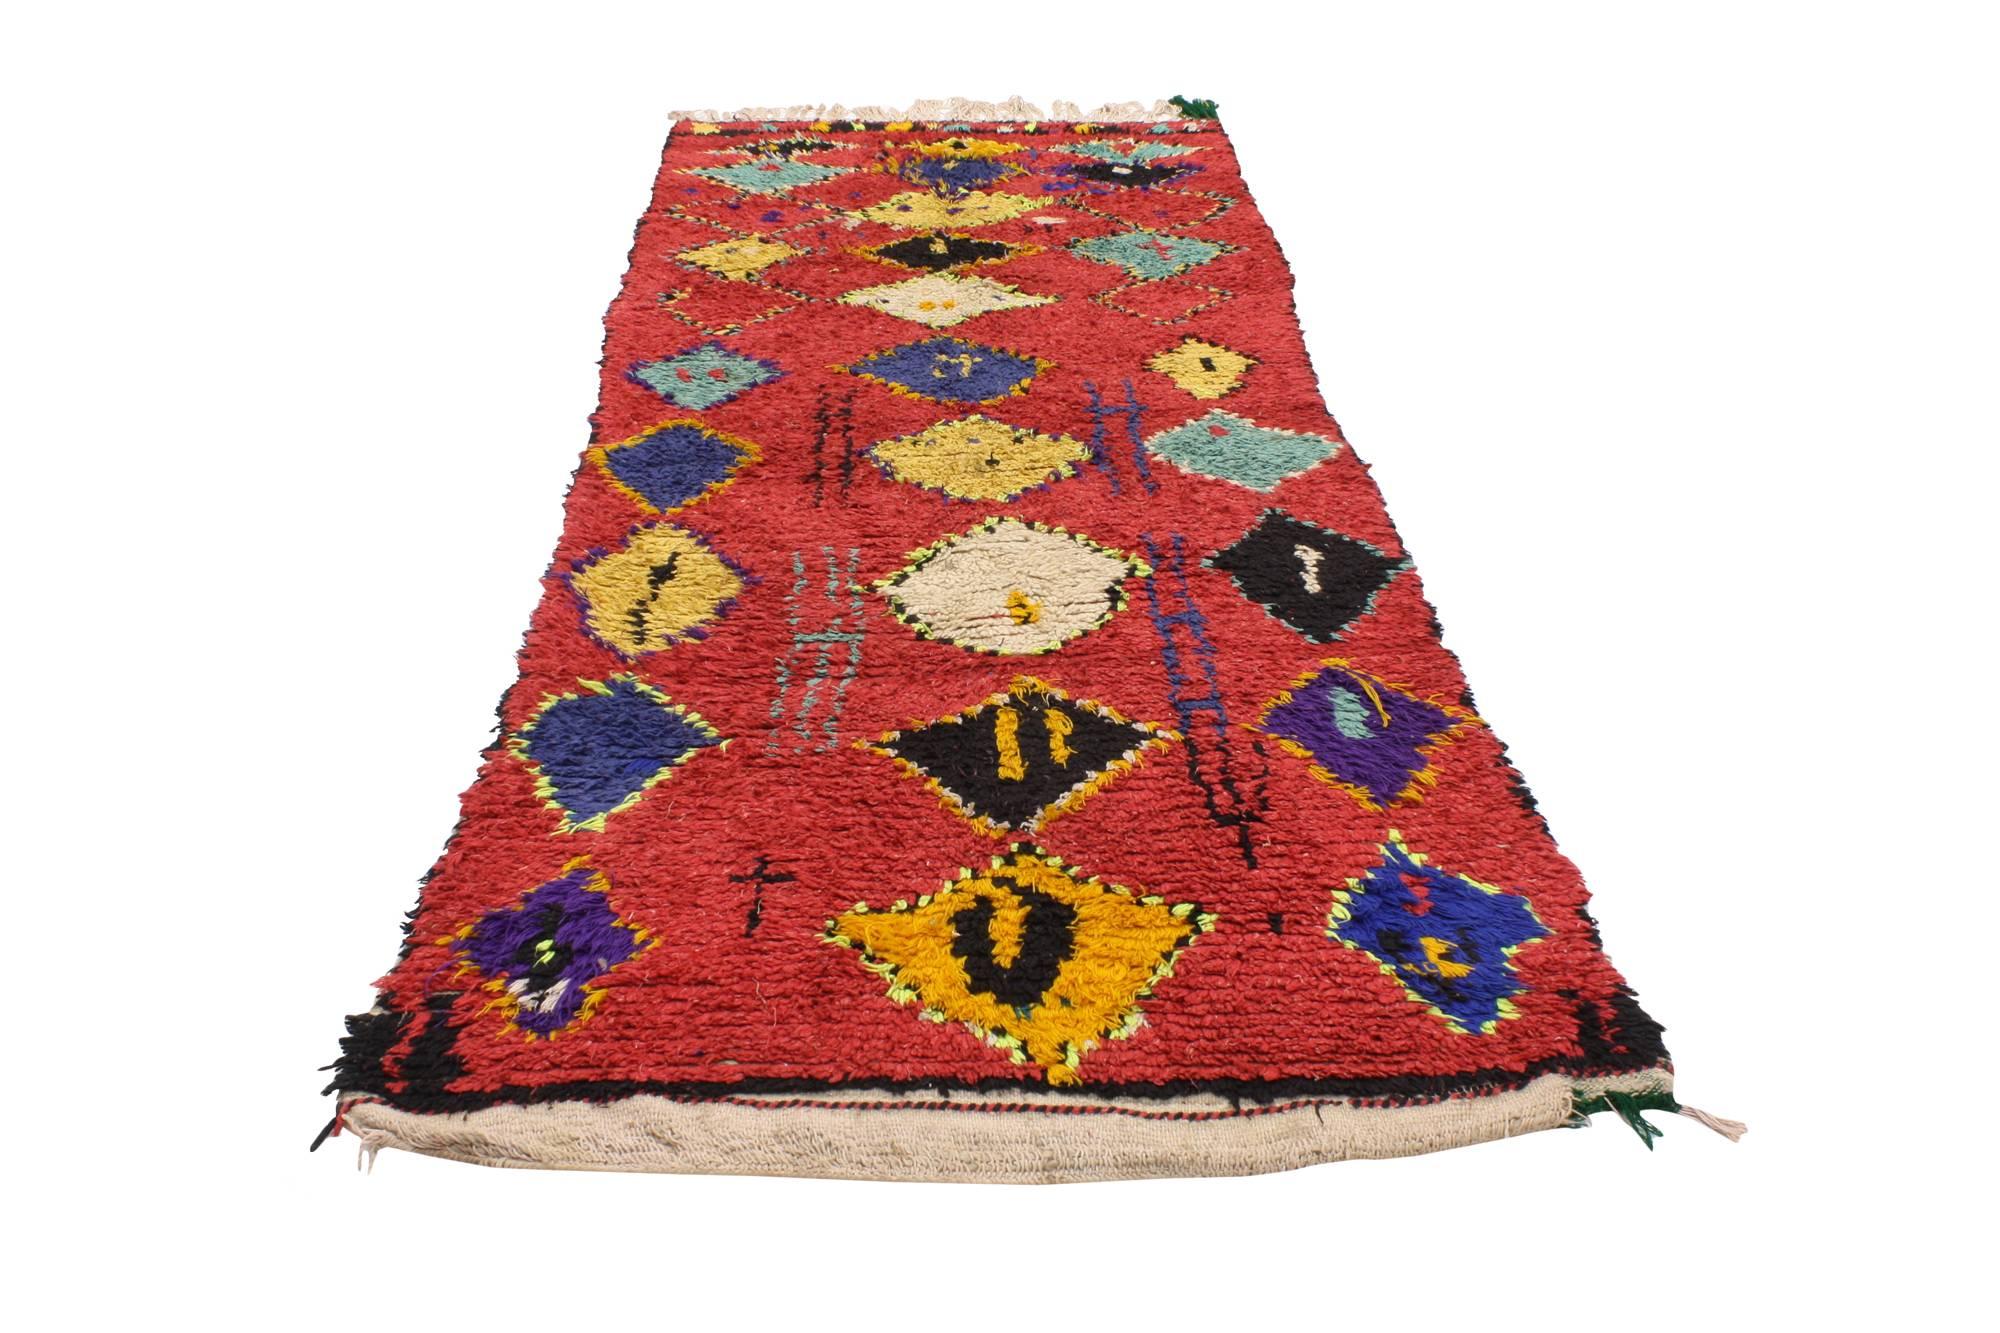 20470, vintage Berber Moroccan rug runner. A fiery shade of red provides a beautiful backdrop for the varied color diamonds that overlay this hand-knotted wool vintage Berber Moroccan rug runner. This Moroccan runner features three rows of stacked